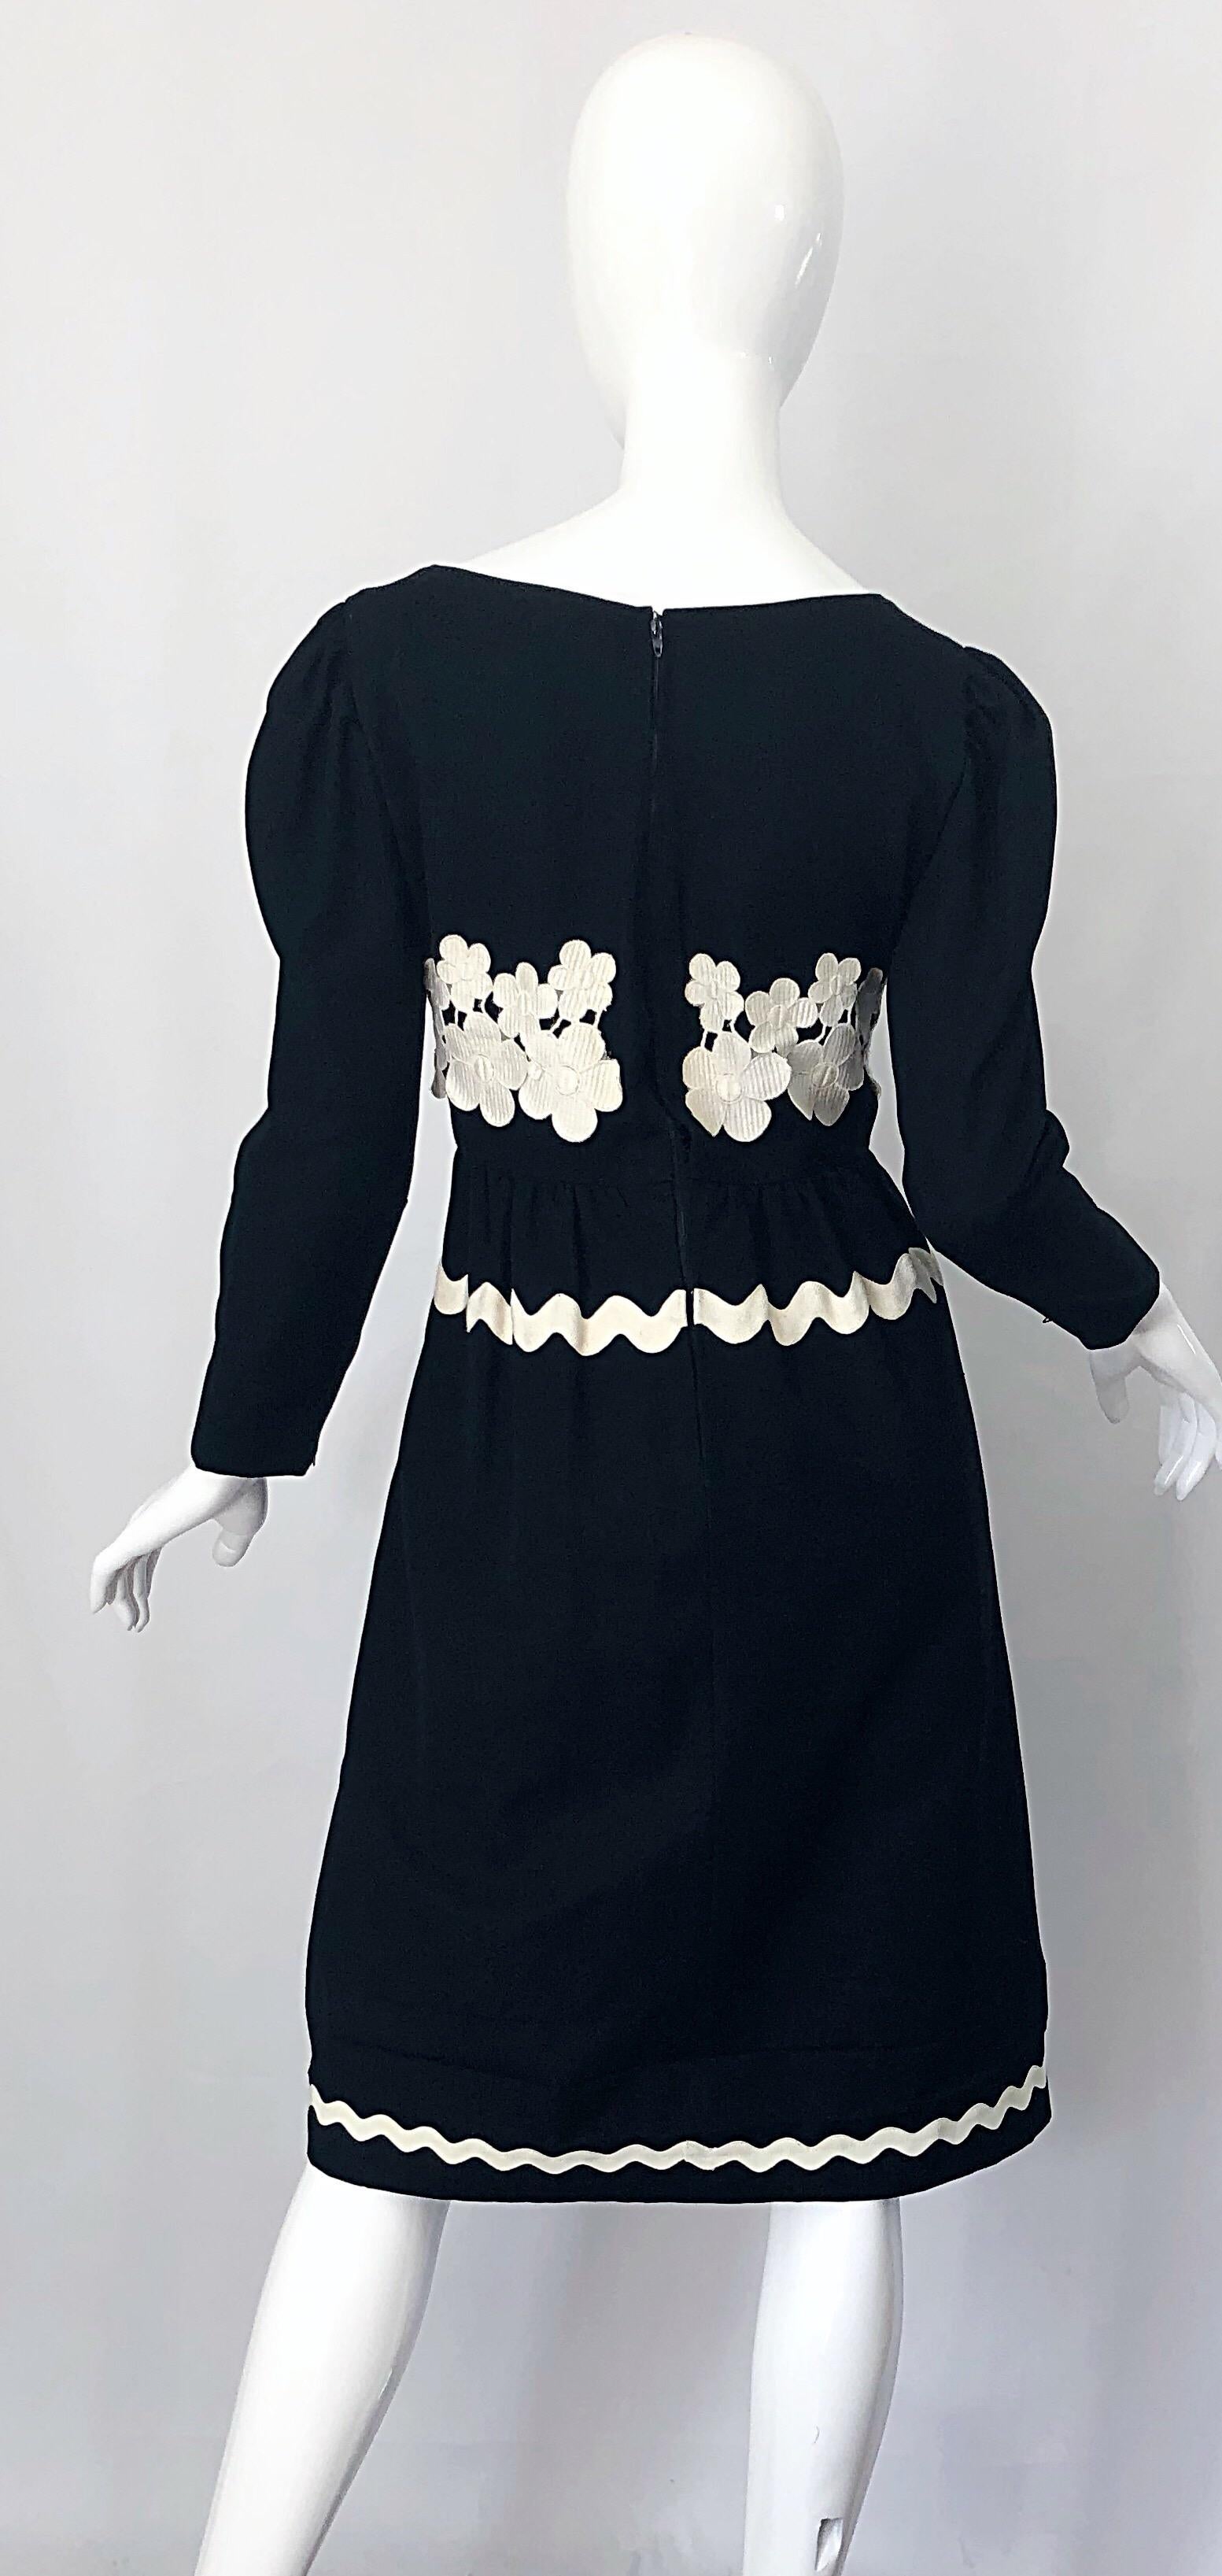 1960s Oscar de la Renta Black and White Embroidered Flower Rickrack 60s Dress In Excellent Condition For Sale In San Diego, CA